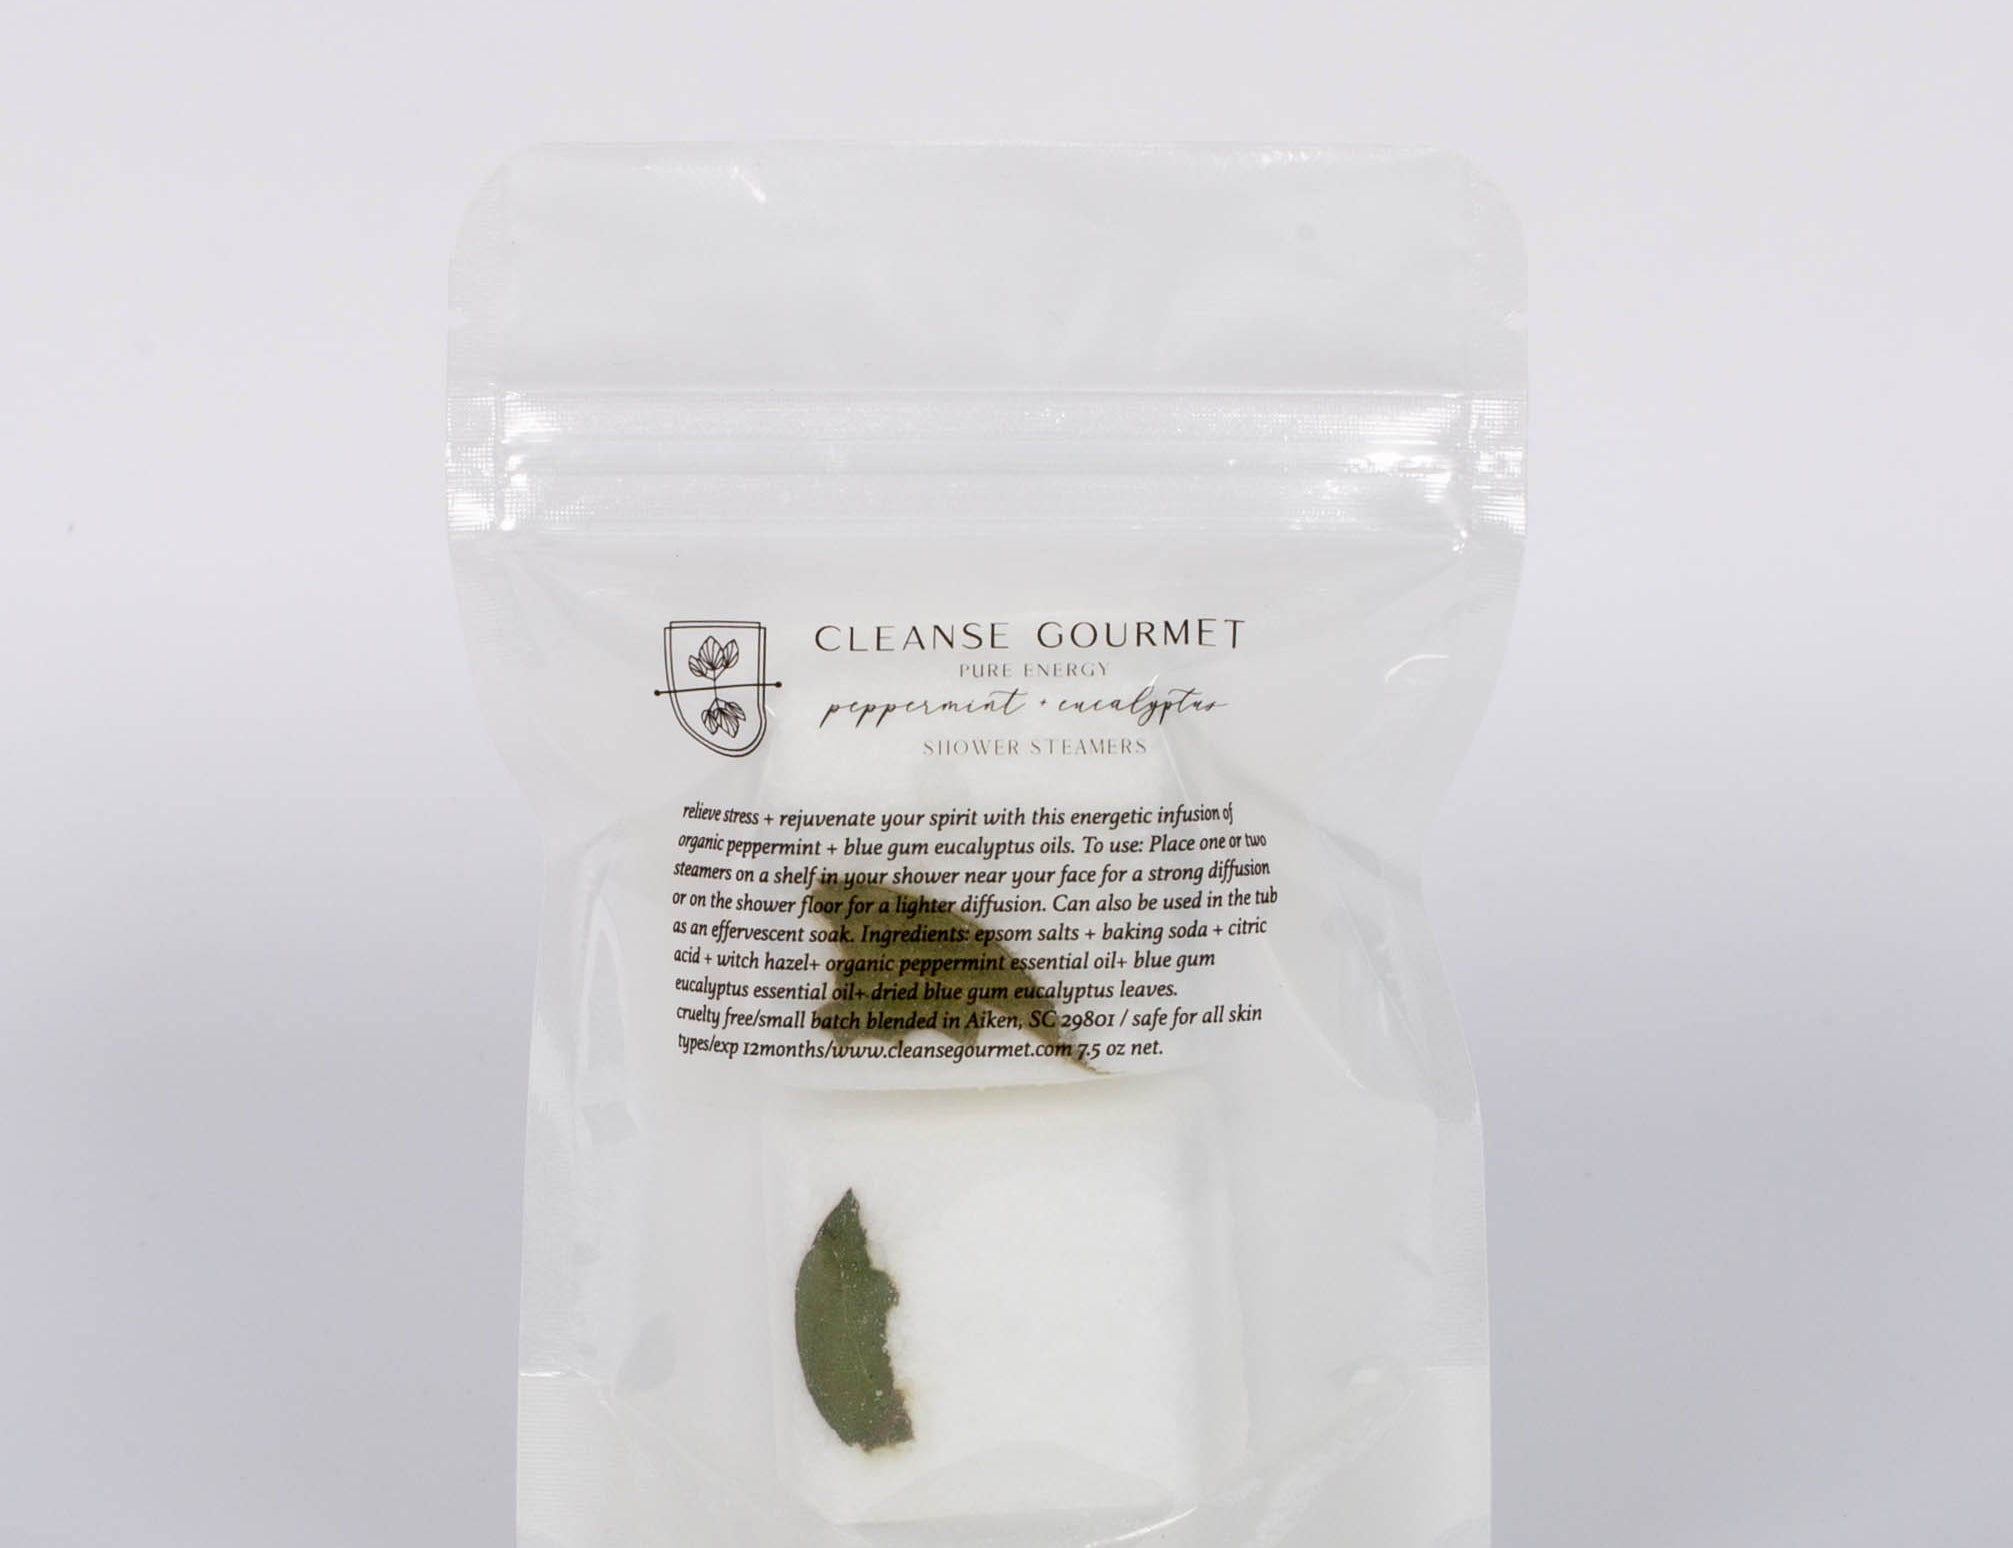 Pack of two pure Energy Eucalyptus + Peppermint Shower Steamers with essential oils by Cleanse Gourmet.